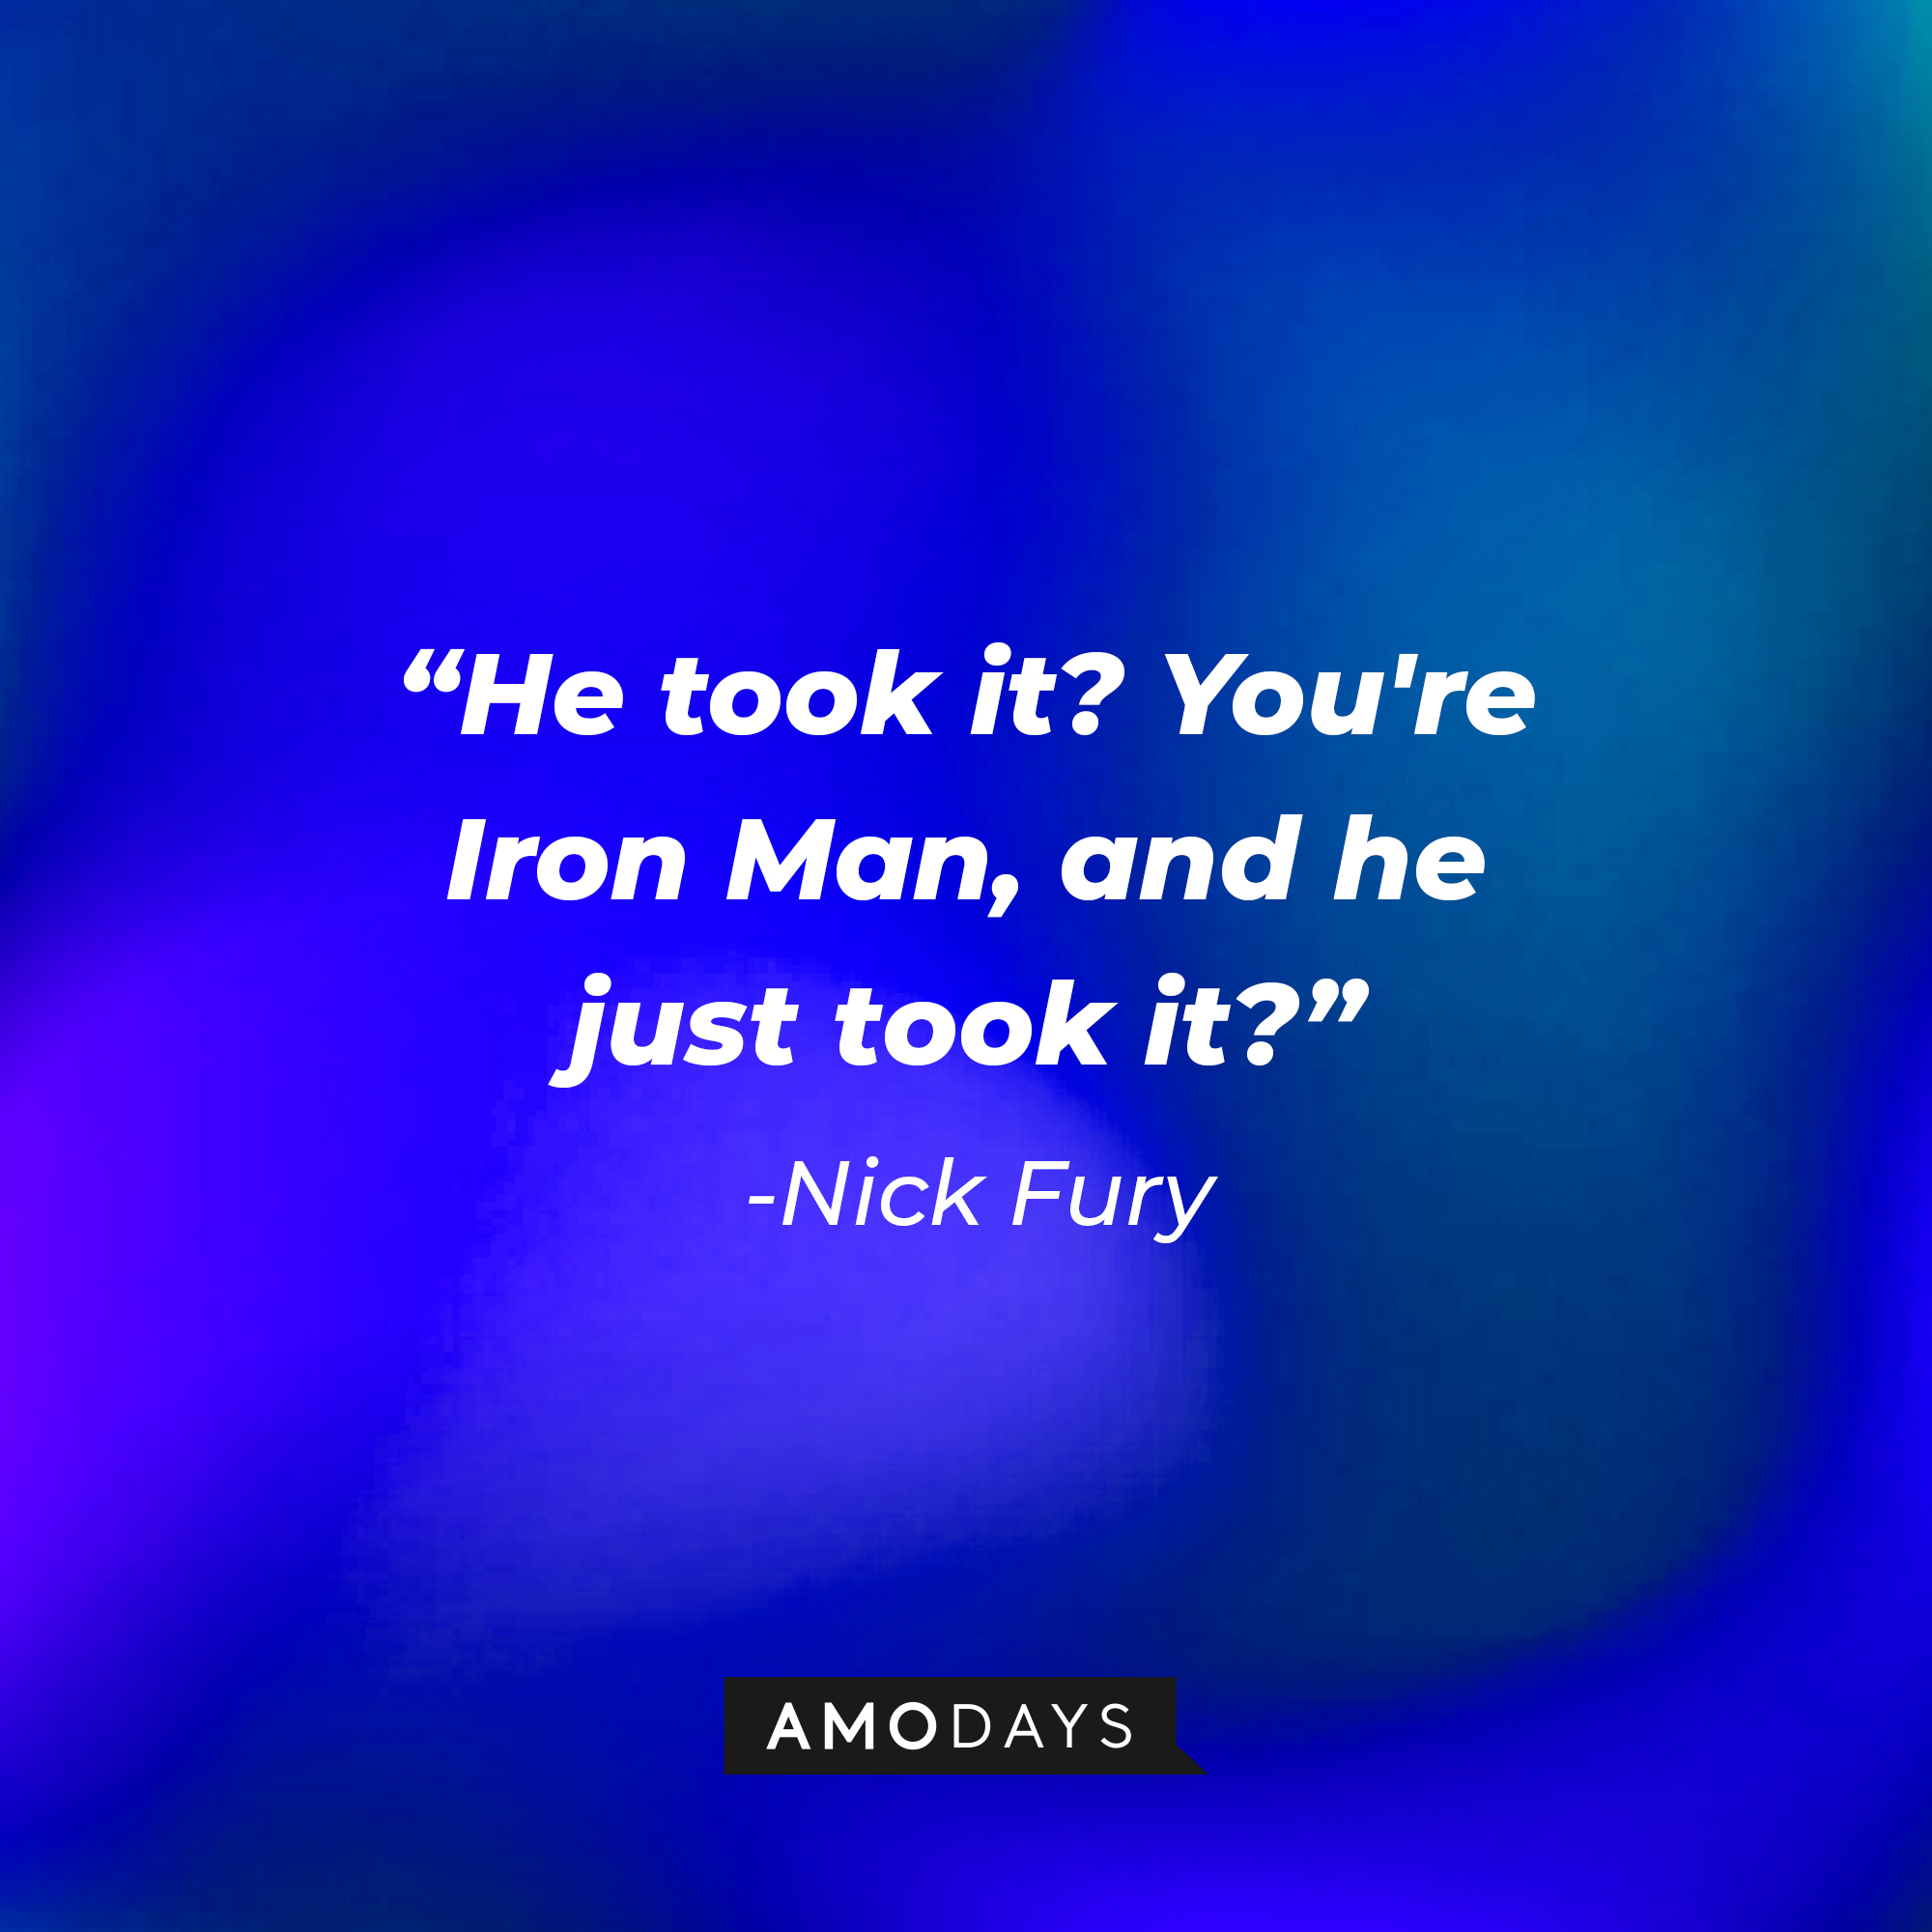 Nick Fury's quote: "He took it? You're Iron Man, and he just took it?" | Source: AmoDays